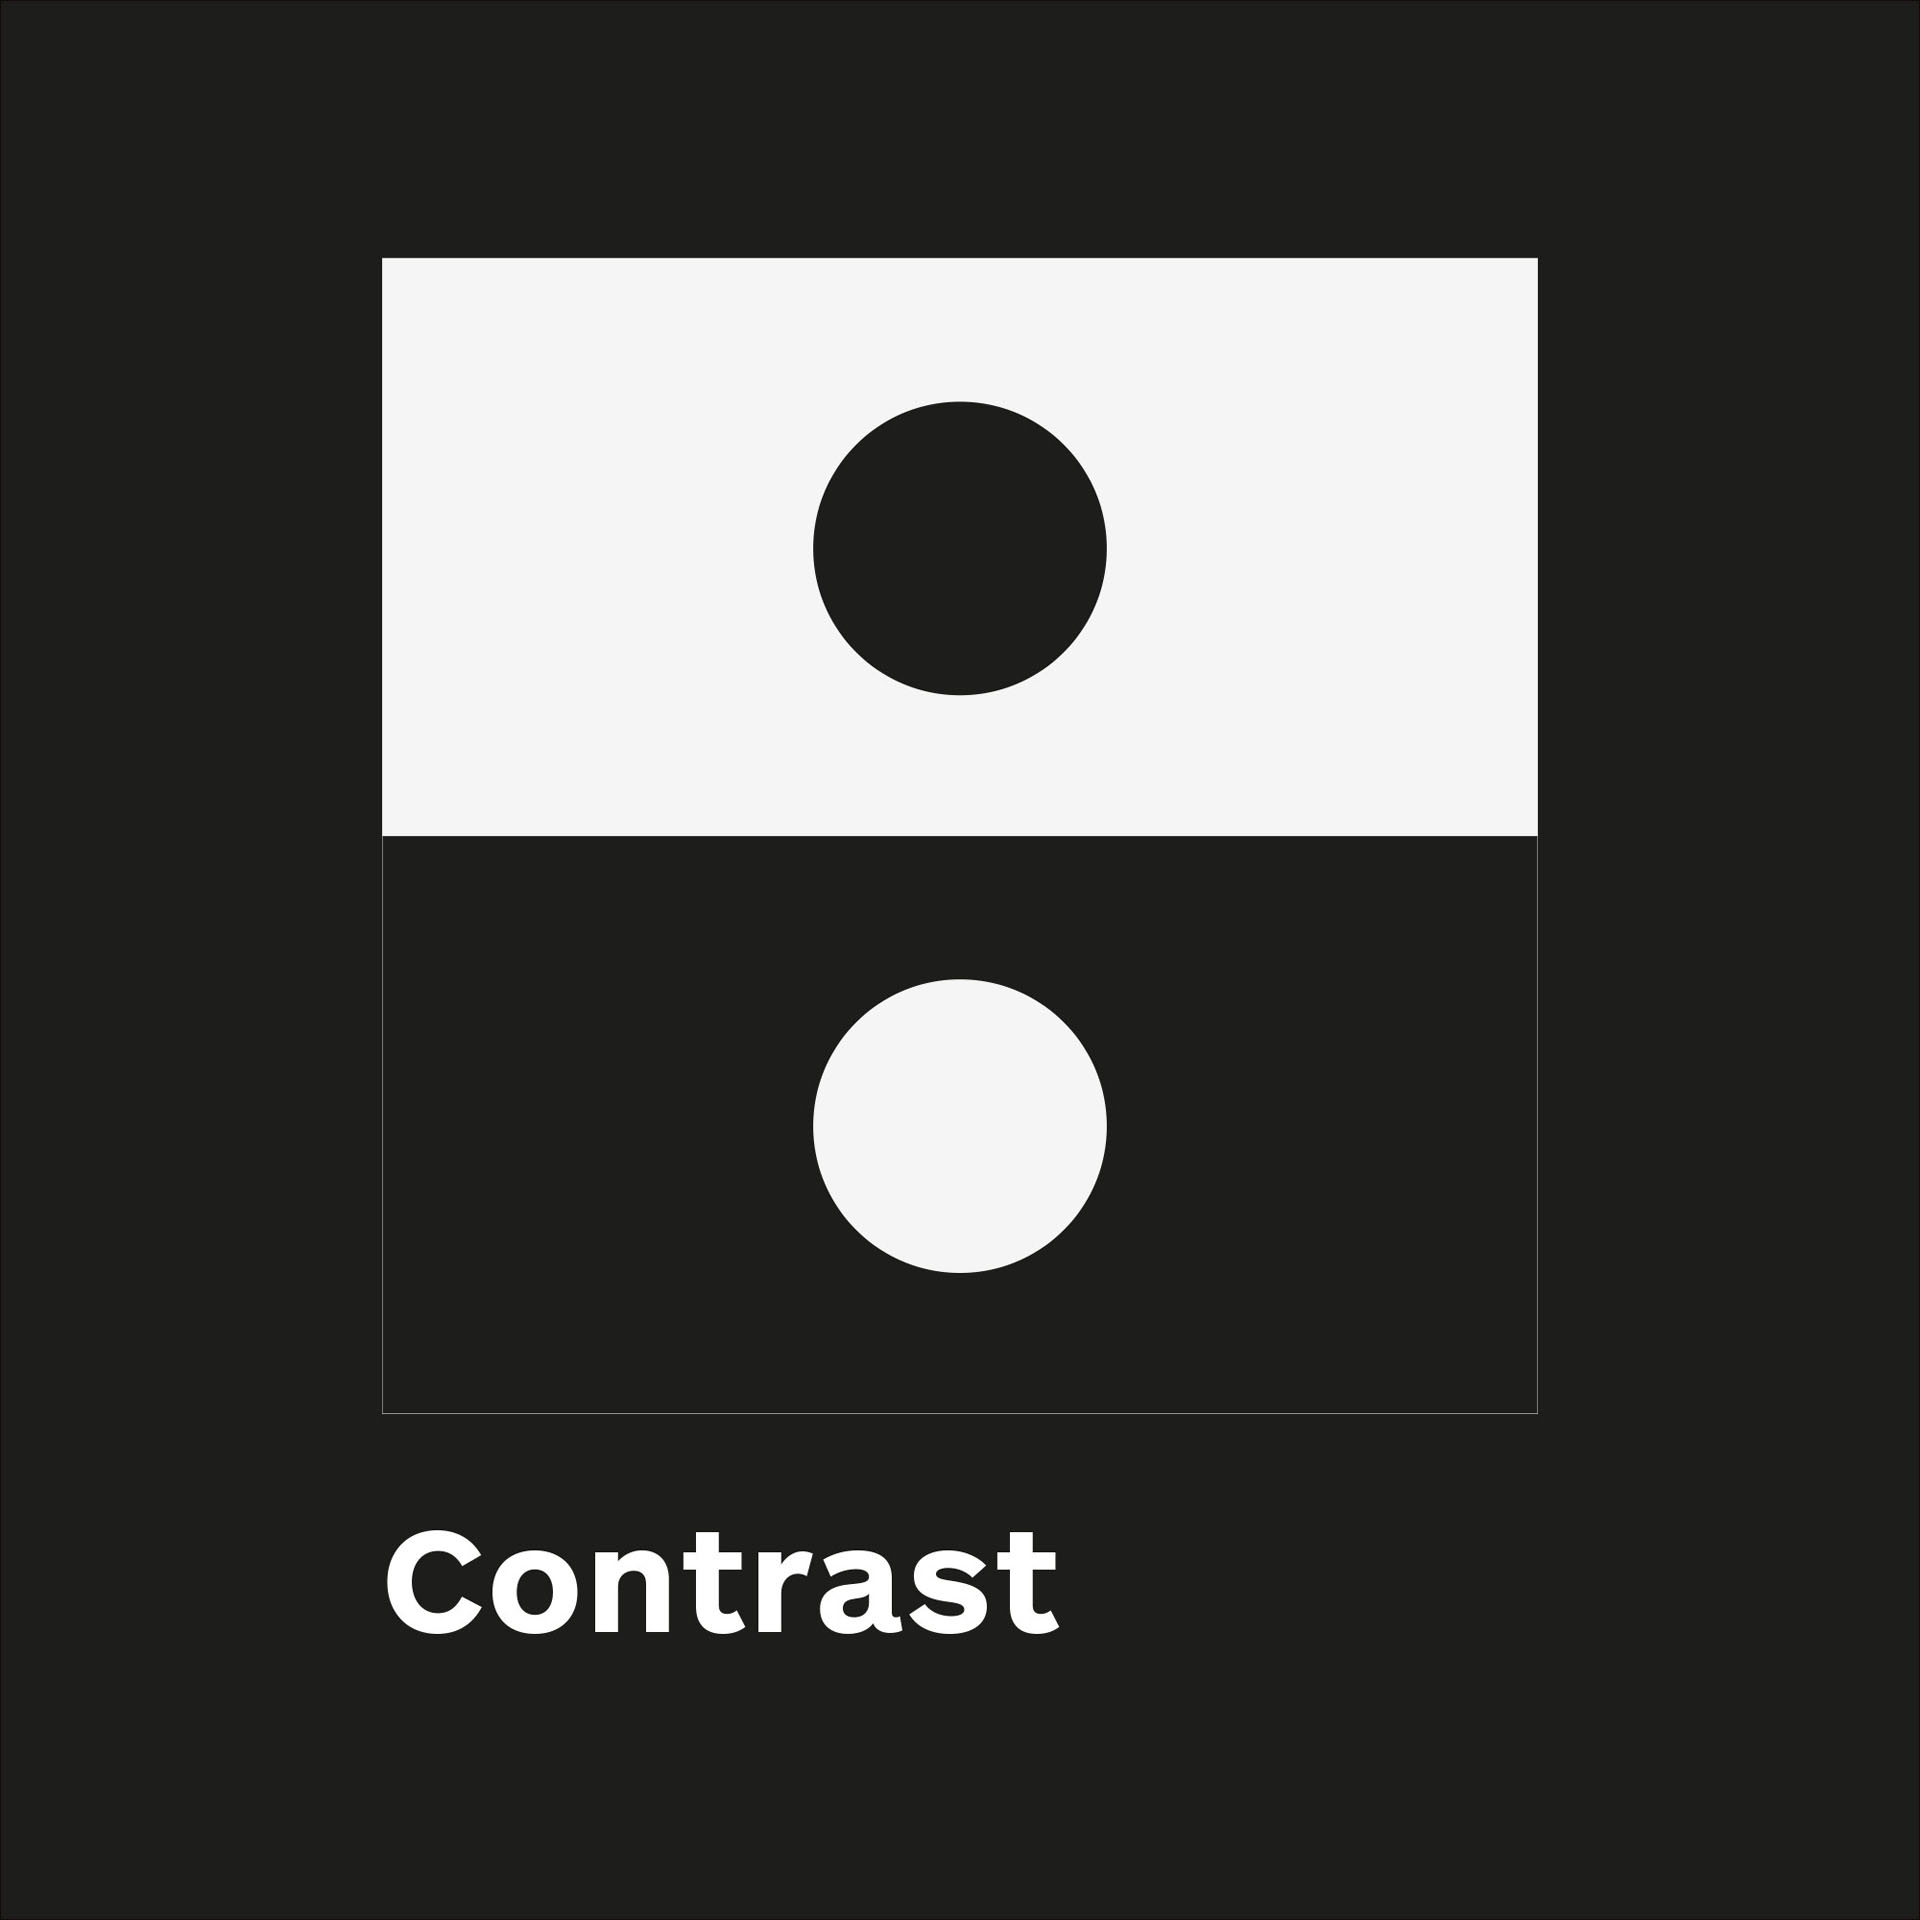 Illustration of the contrast principle in graphic design